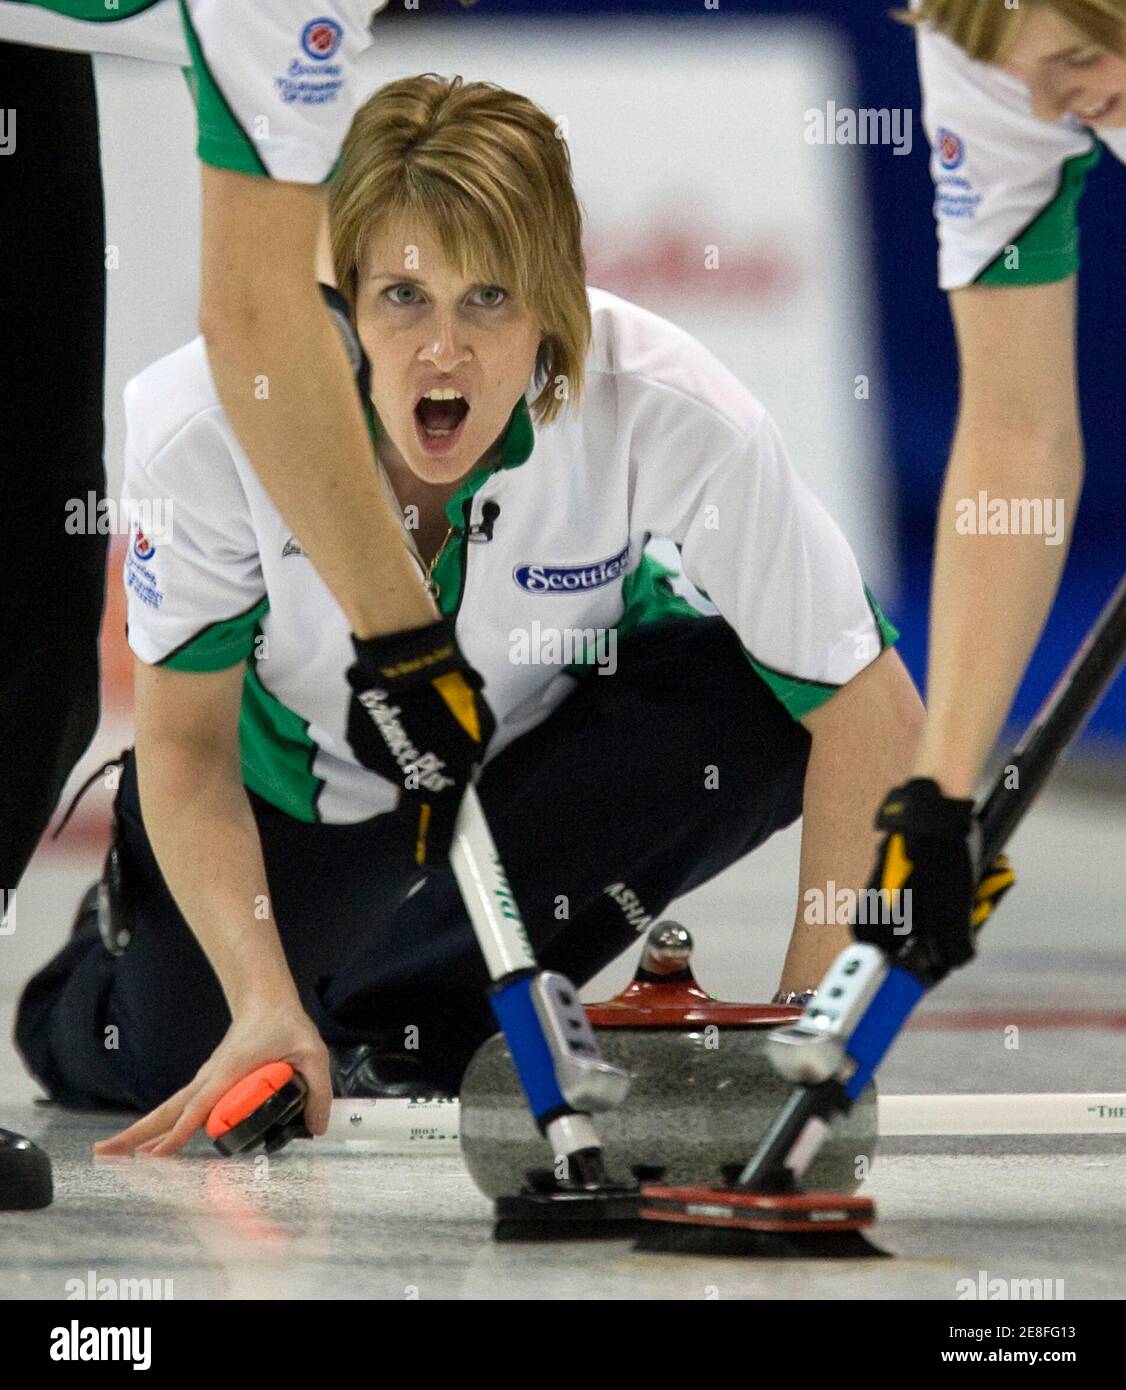 Saskatchewan skip Stefanie Lawton shouts to team mates during a playoff game against Team Canada at the Canadian Women's Curling Championships in Victoria, British Columbia February 28, 2009.       REUTERS/Andy Clark     (CANADA) Stock Photo